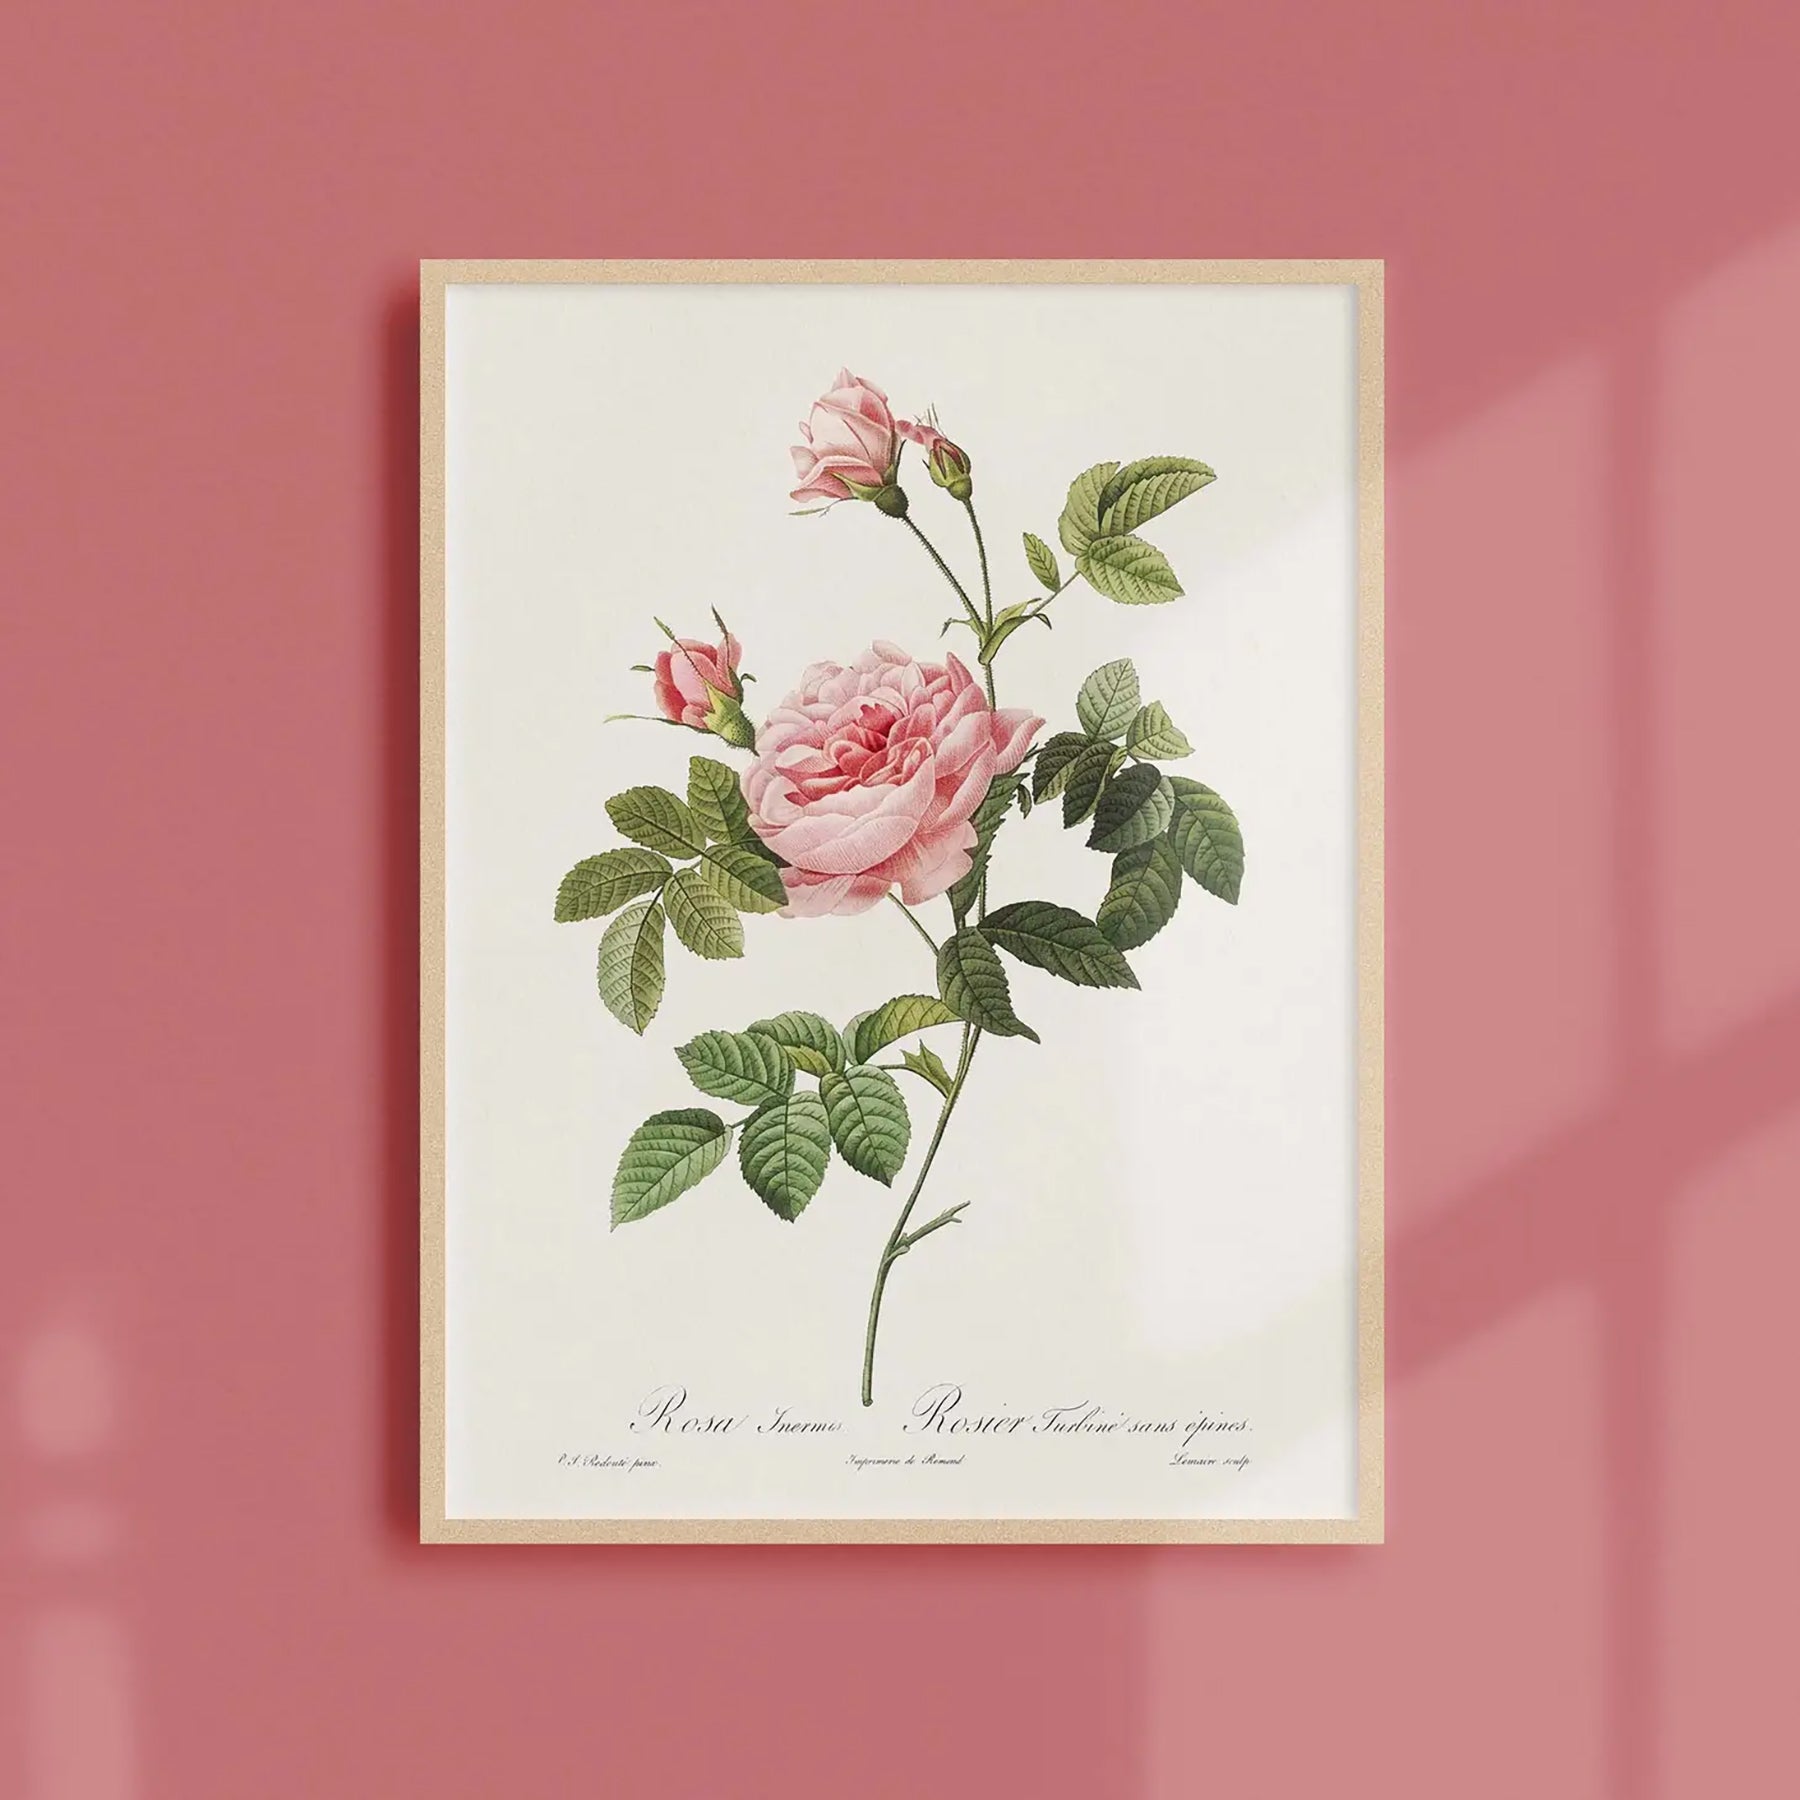 Reproduction of a botanical drawing from the book "les roses" published in 1817 and illustrated by the famous painter and botanist pierre-joseph redouté. Generosa Home and Living